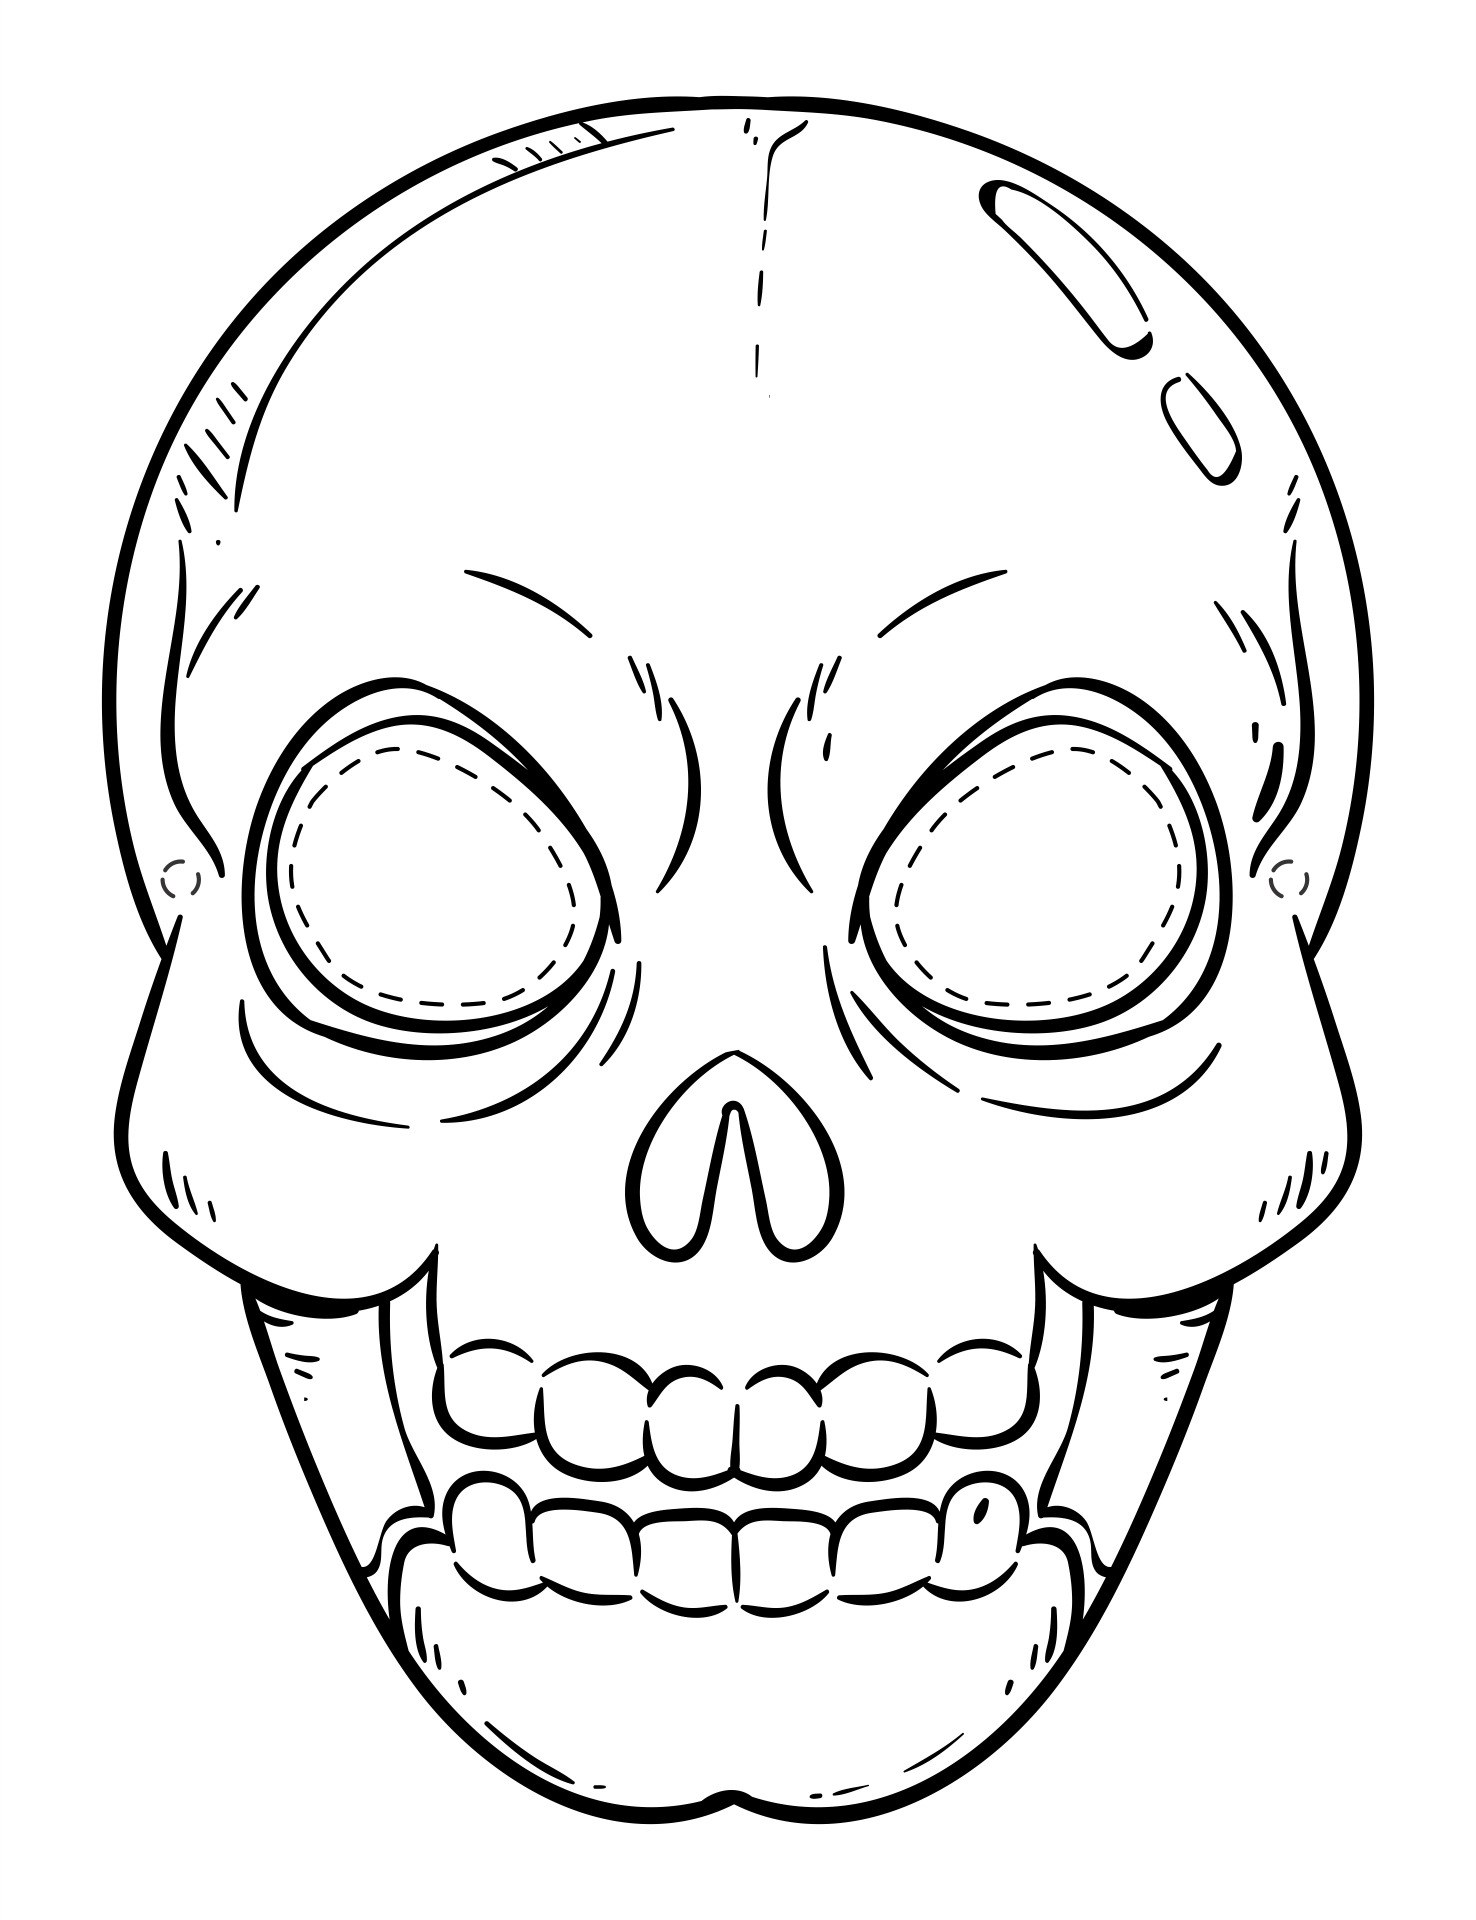 15-best-printable-halloween-masks-to-color-for-free-at-printablee